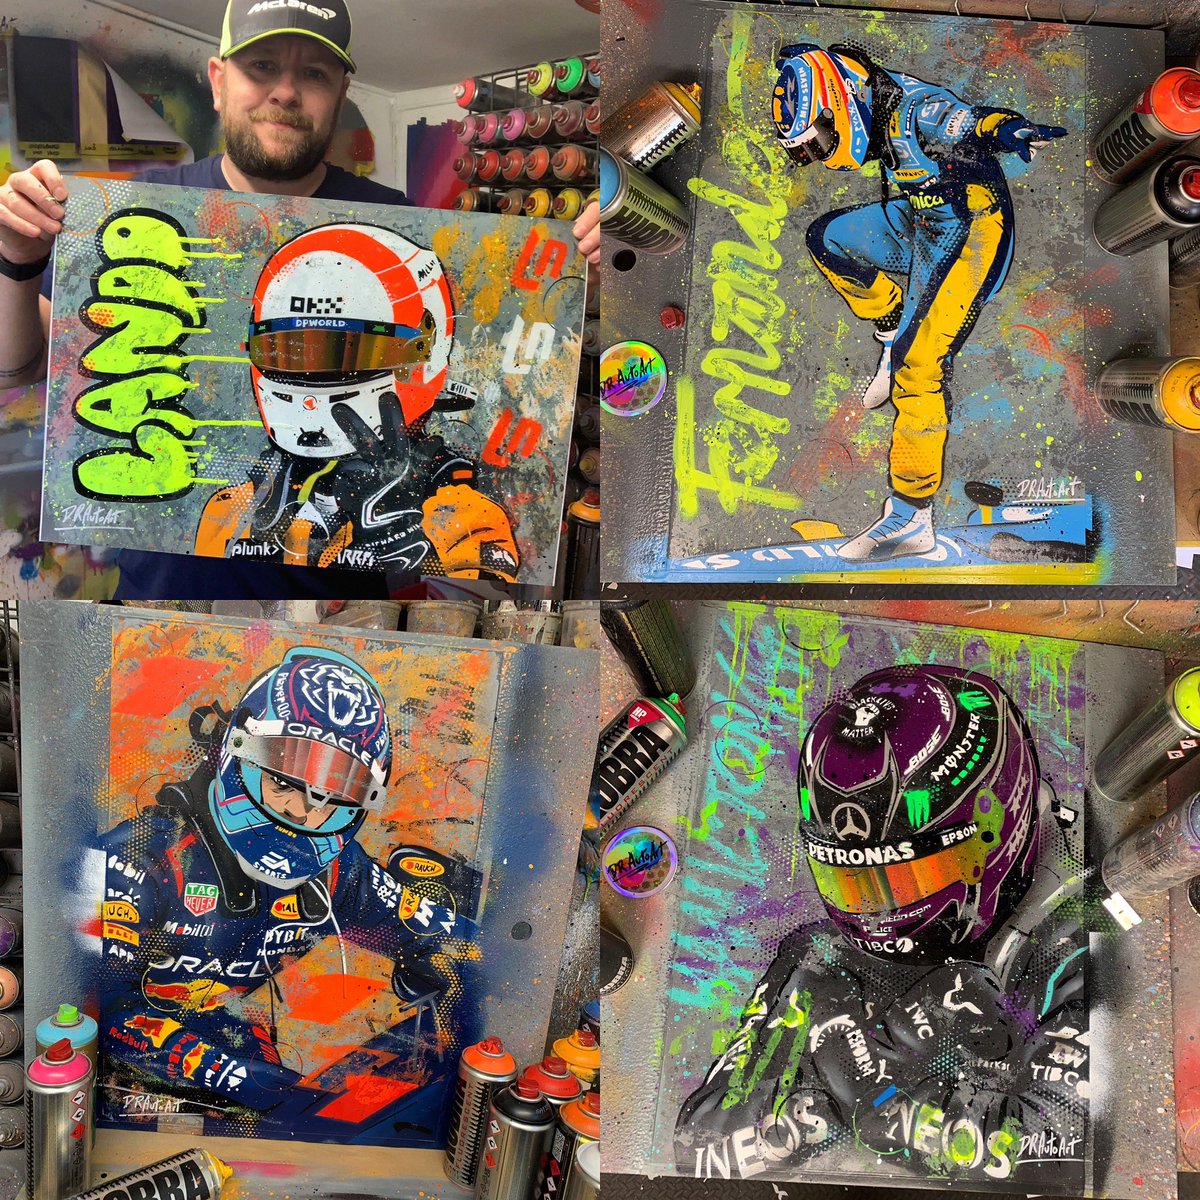 F1 Fans! Check out these artworks. Each graffiti painting is handmade and totally unique. Please share this post to help spread the word! 🤟🏻
#drautoart
.
.
#f1 #formula1 #landonorris #fernandoalonso #maxverstappen #lewishamilton #ln4 #fa14 #mv33 #lh44